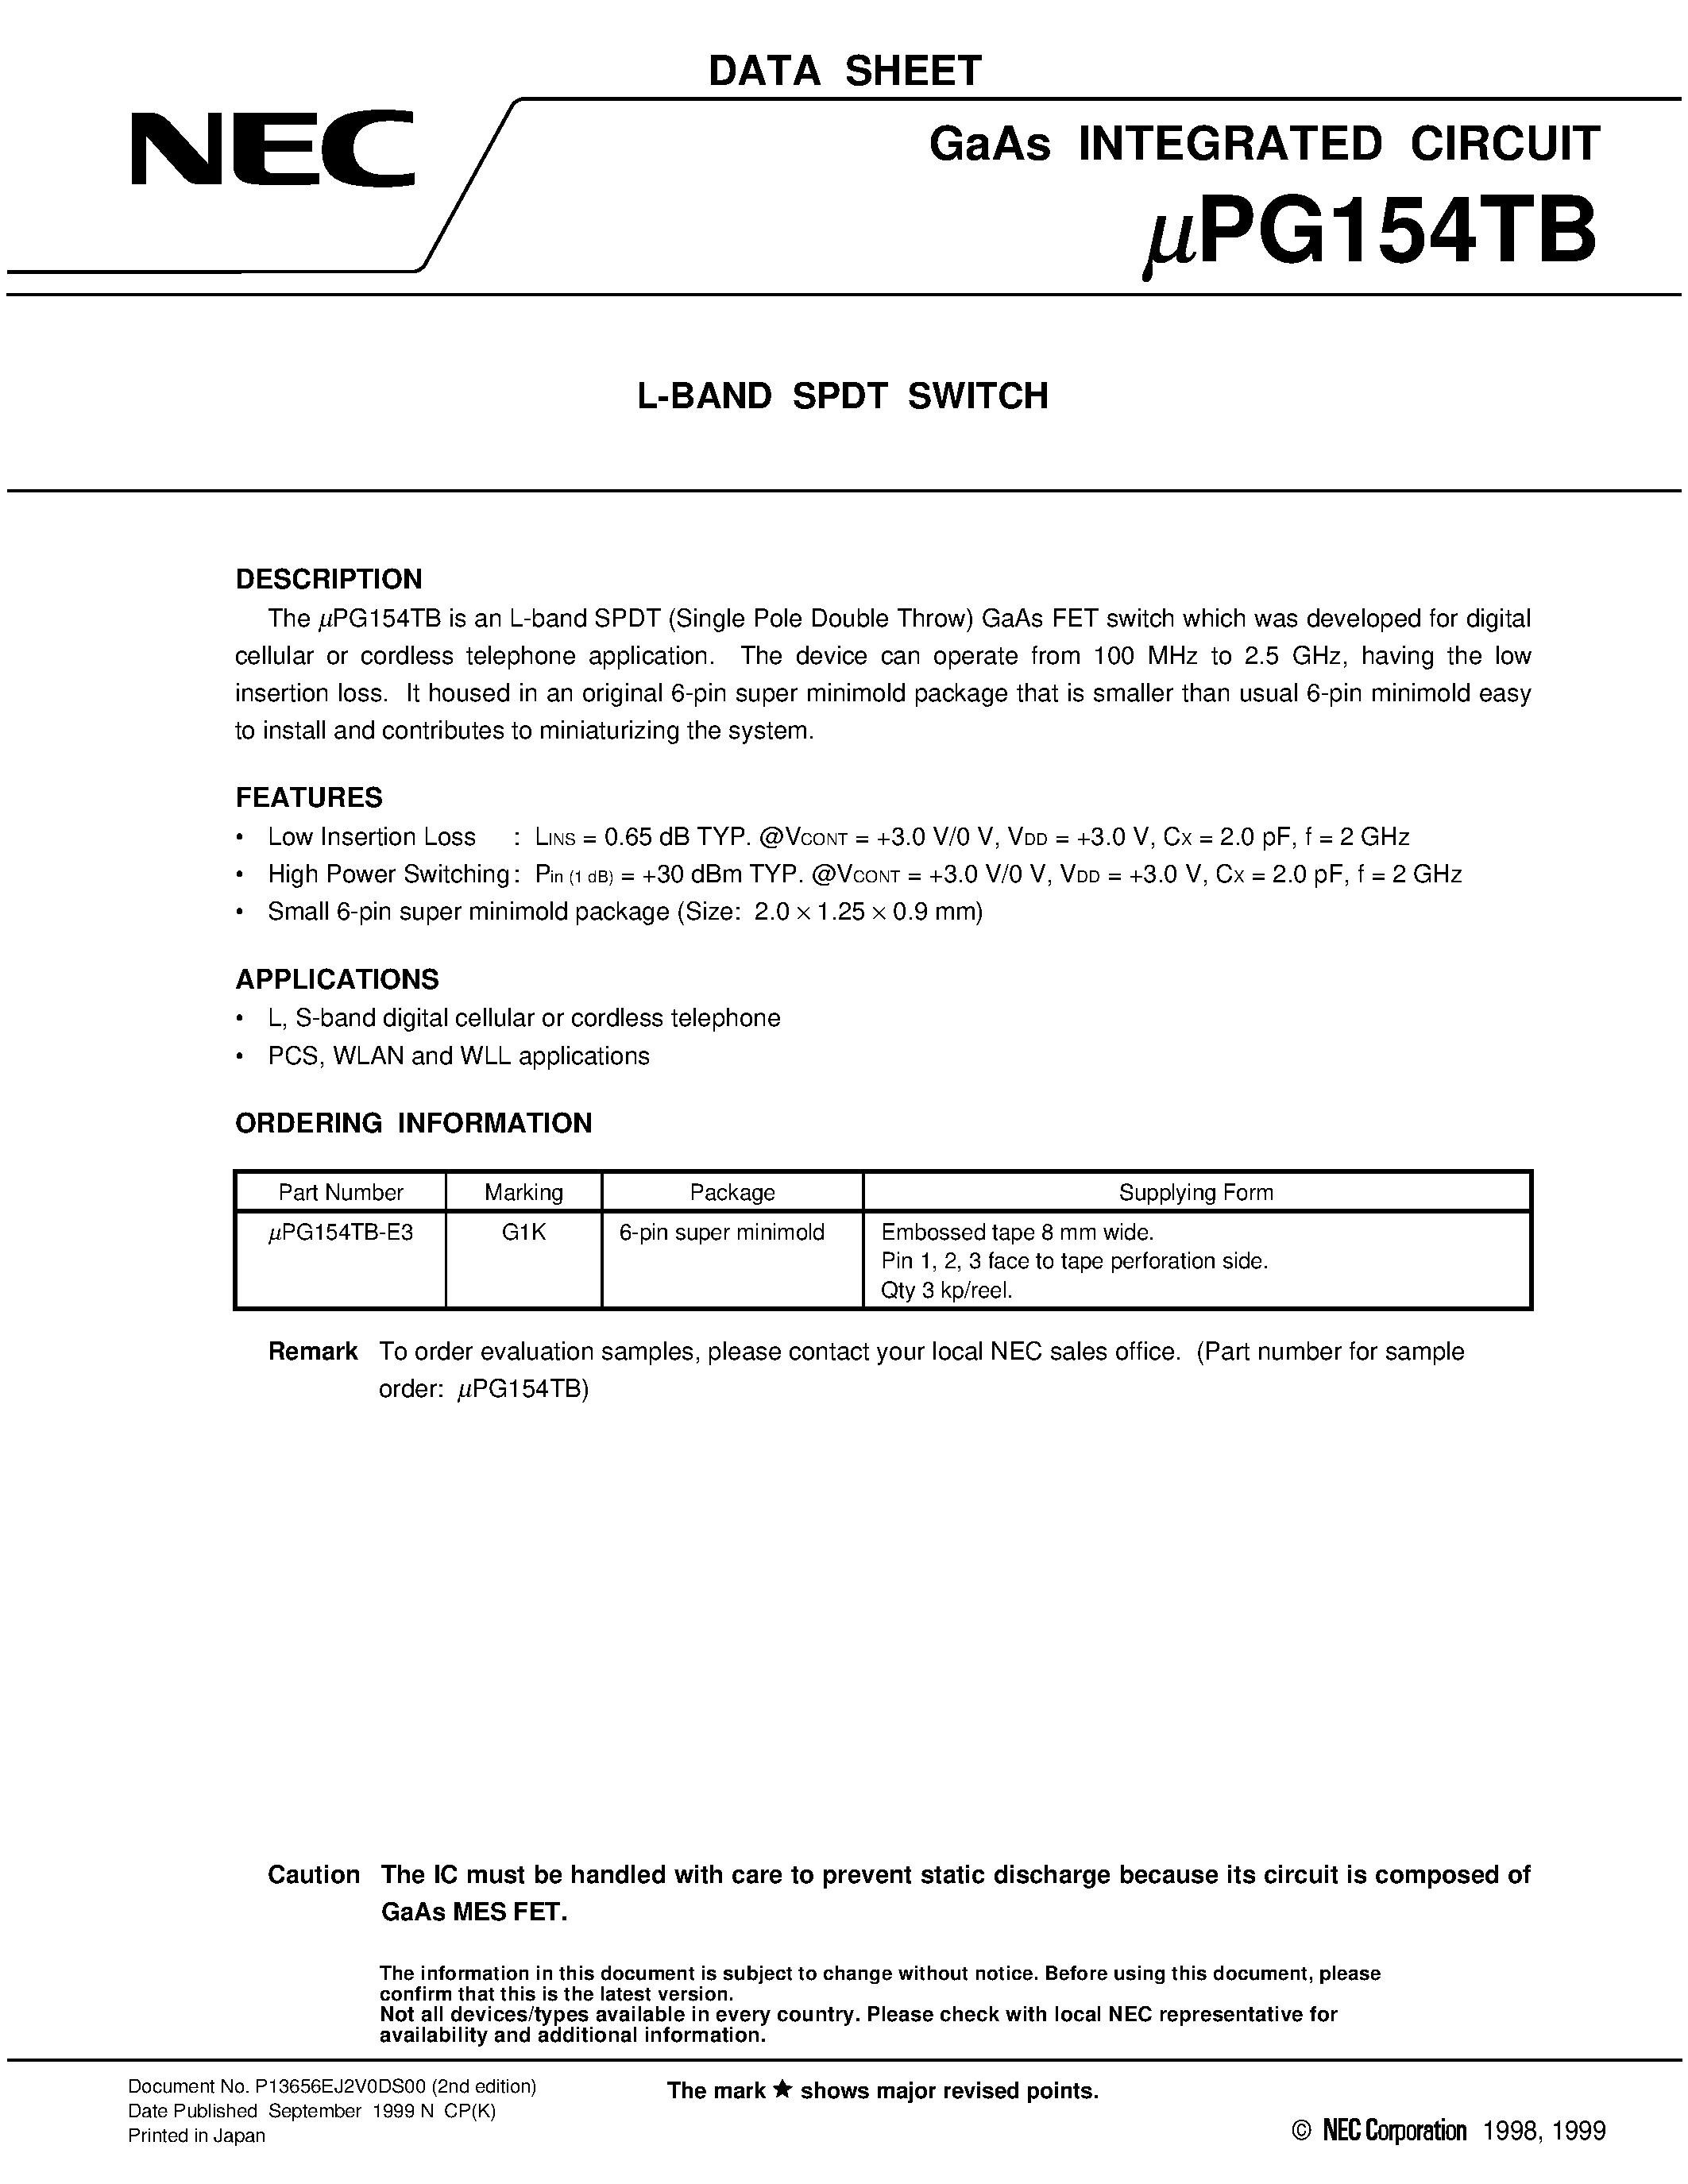 Datasheet UPG154 - L-BAND SPDT SWITCH page 1